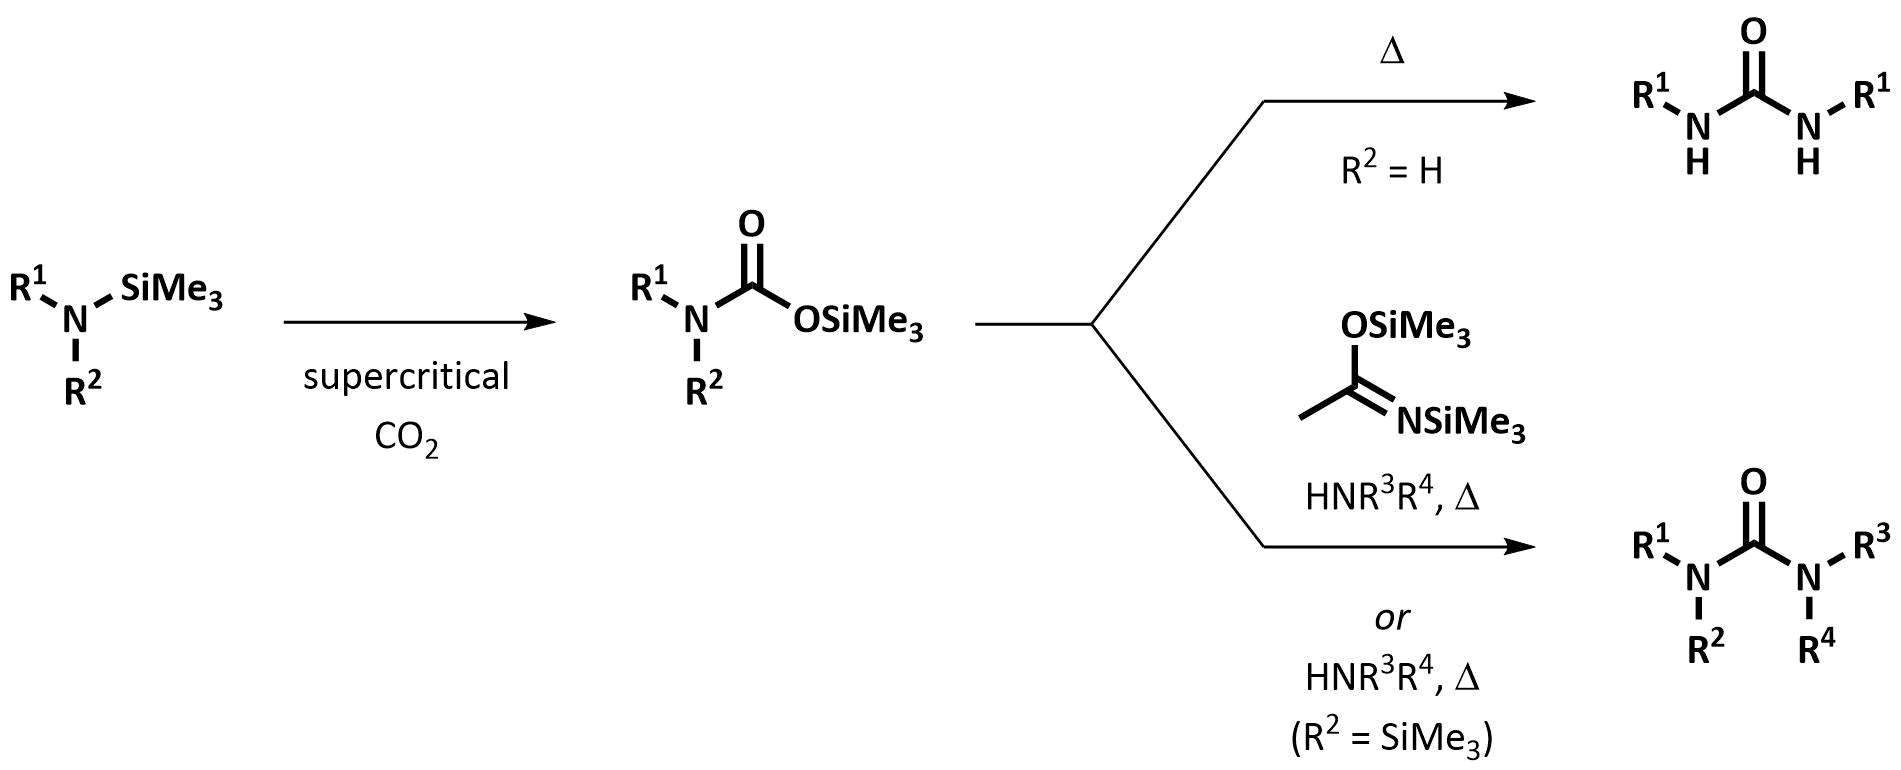 Abstract image for Clean and Efficient Synthesis of <i>O</i>-Silylcarbamates and Ureas in Supercritical Carbon Dioxide